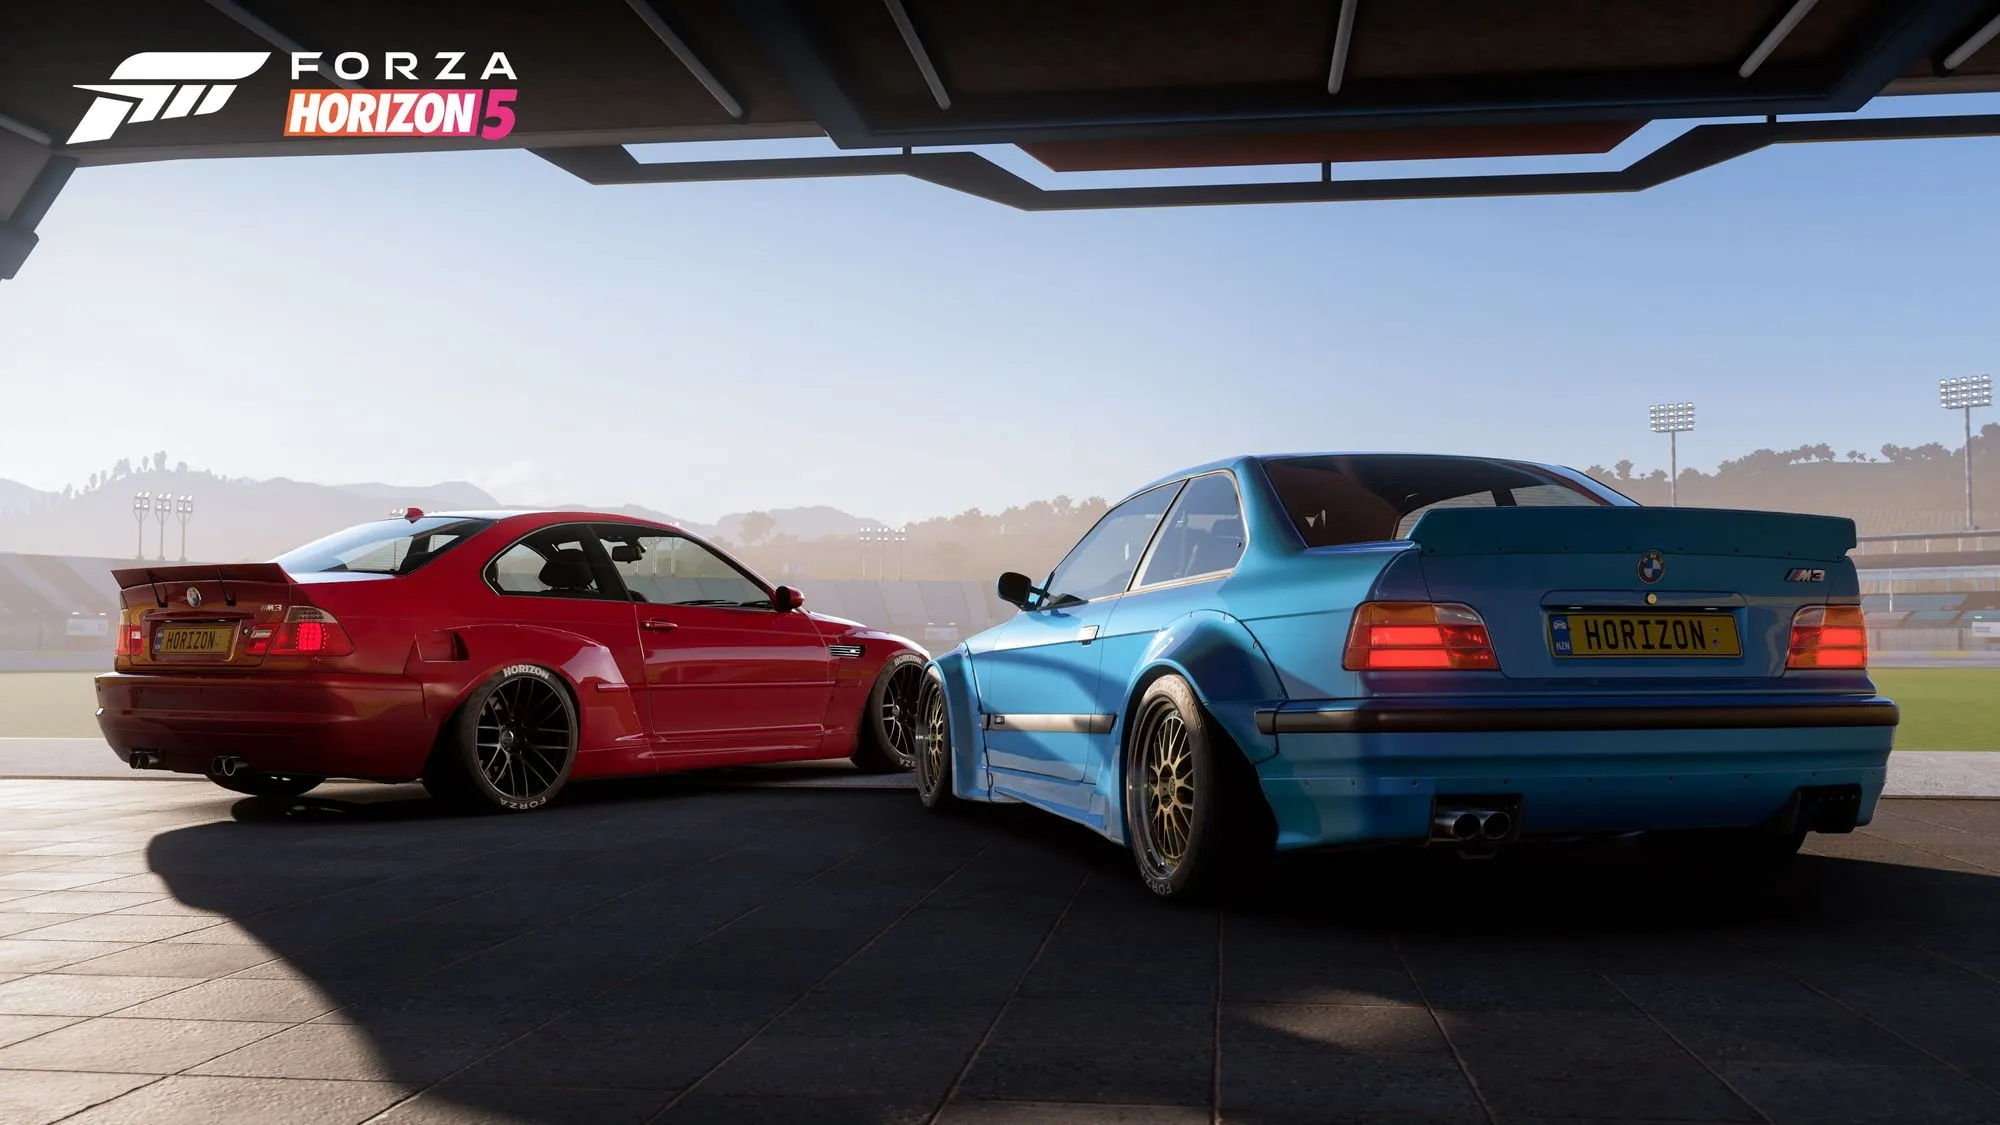 Donut Media Is Getting a Forza Horizon Series